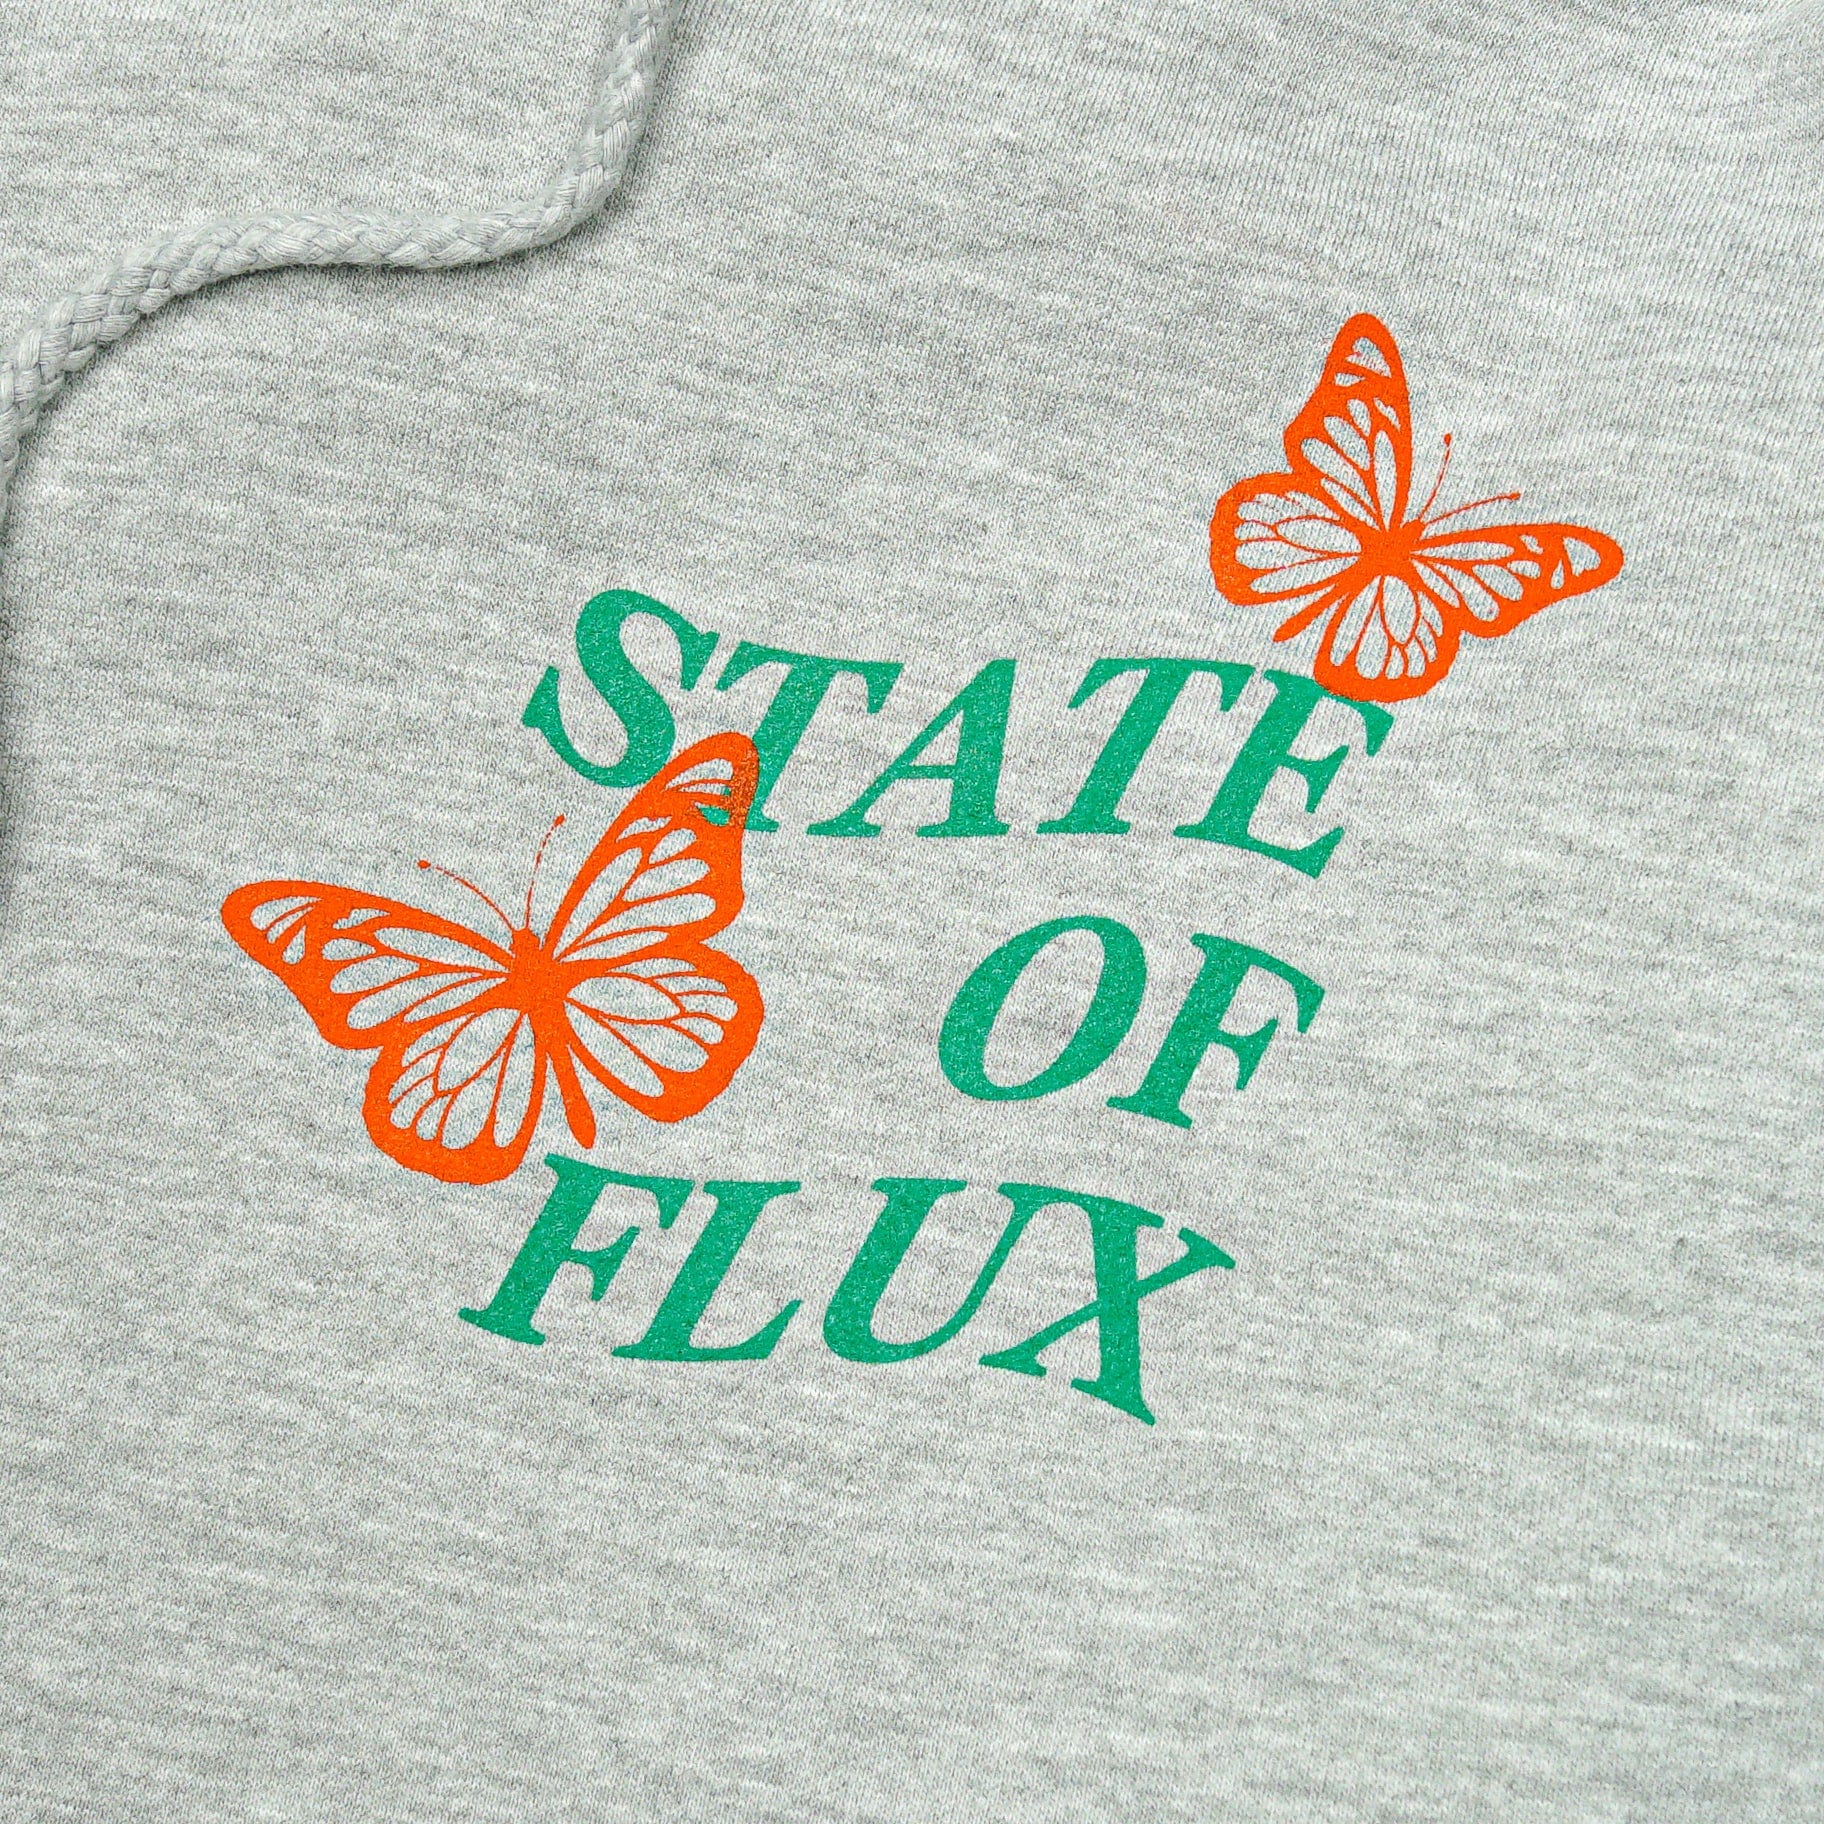 Today Is The Day Hoodie 2.0 in heather grey - State Of Flux - State Of Flux